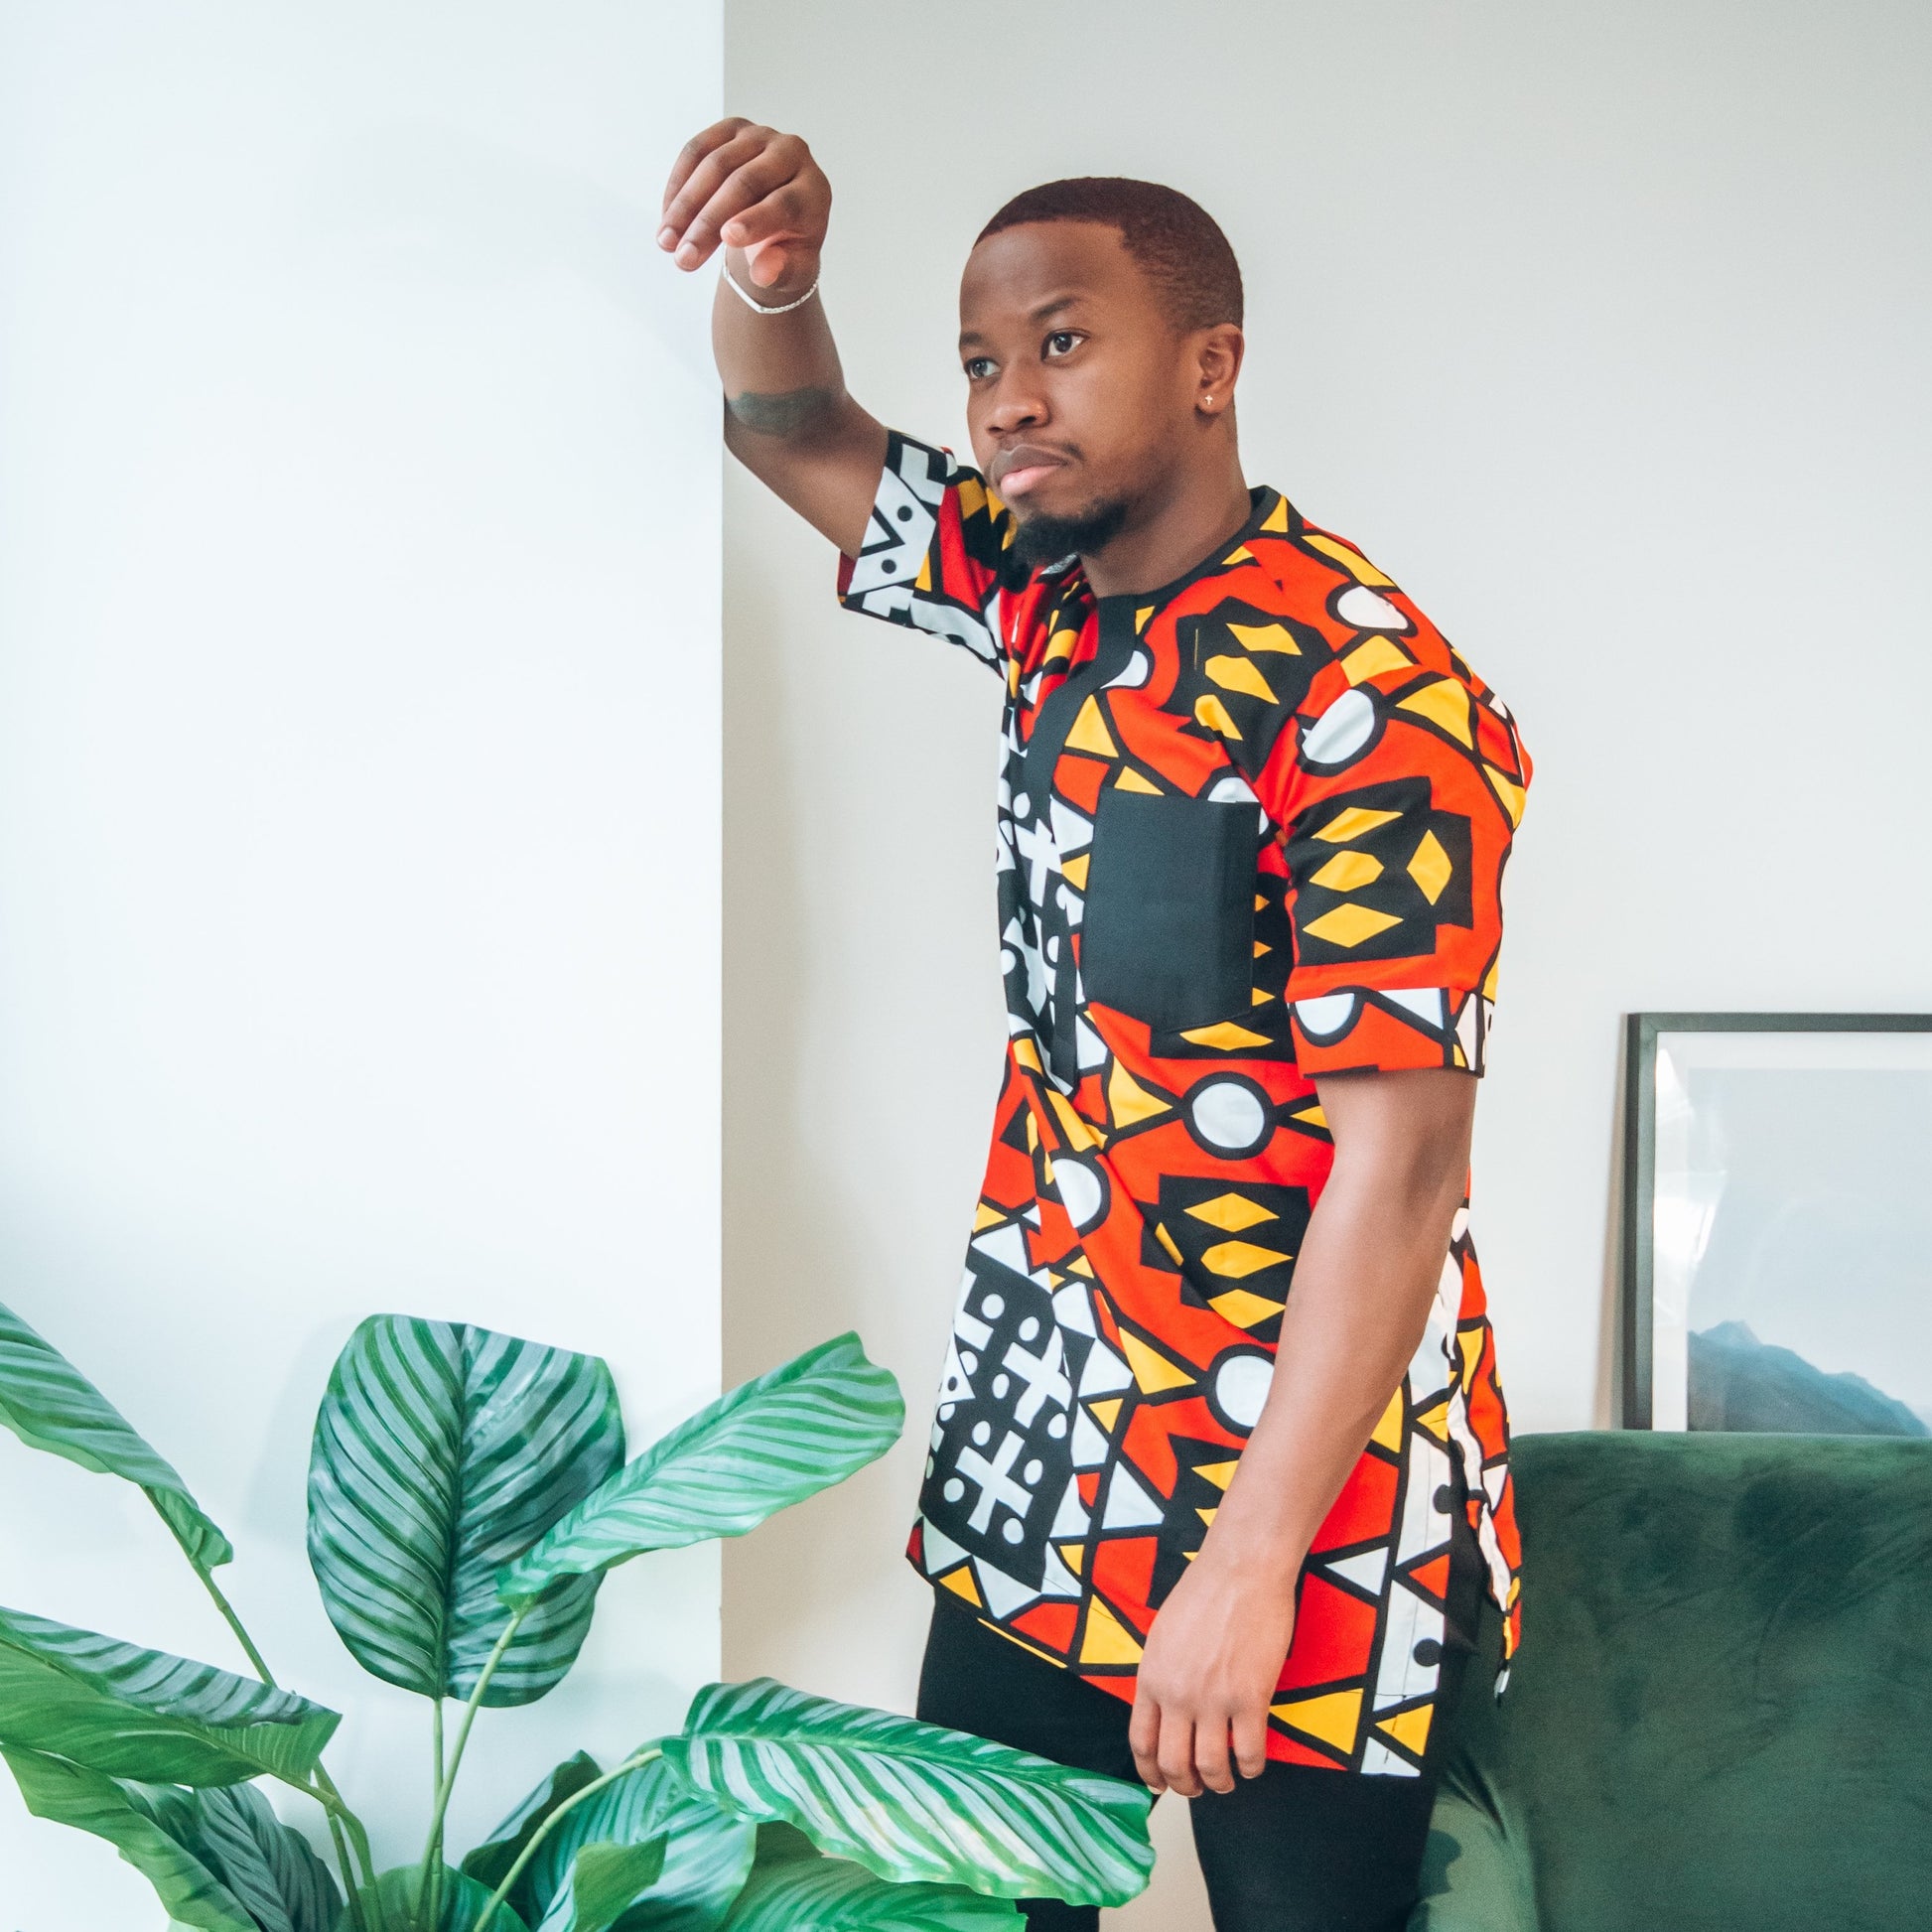 Black man in an African print red, white and yellow top